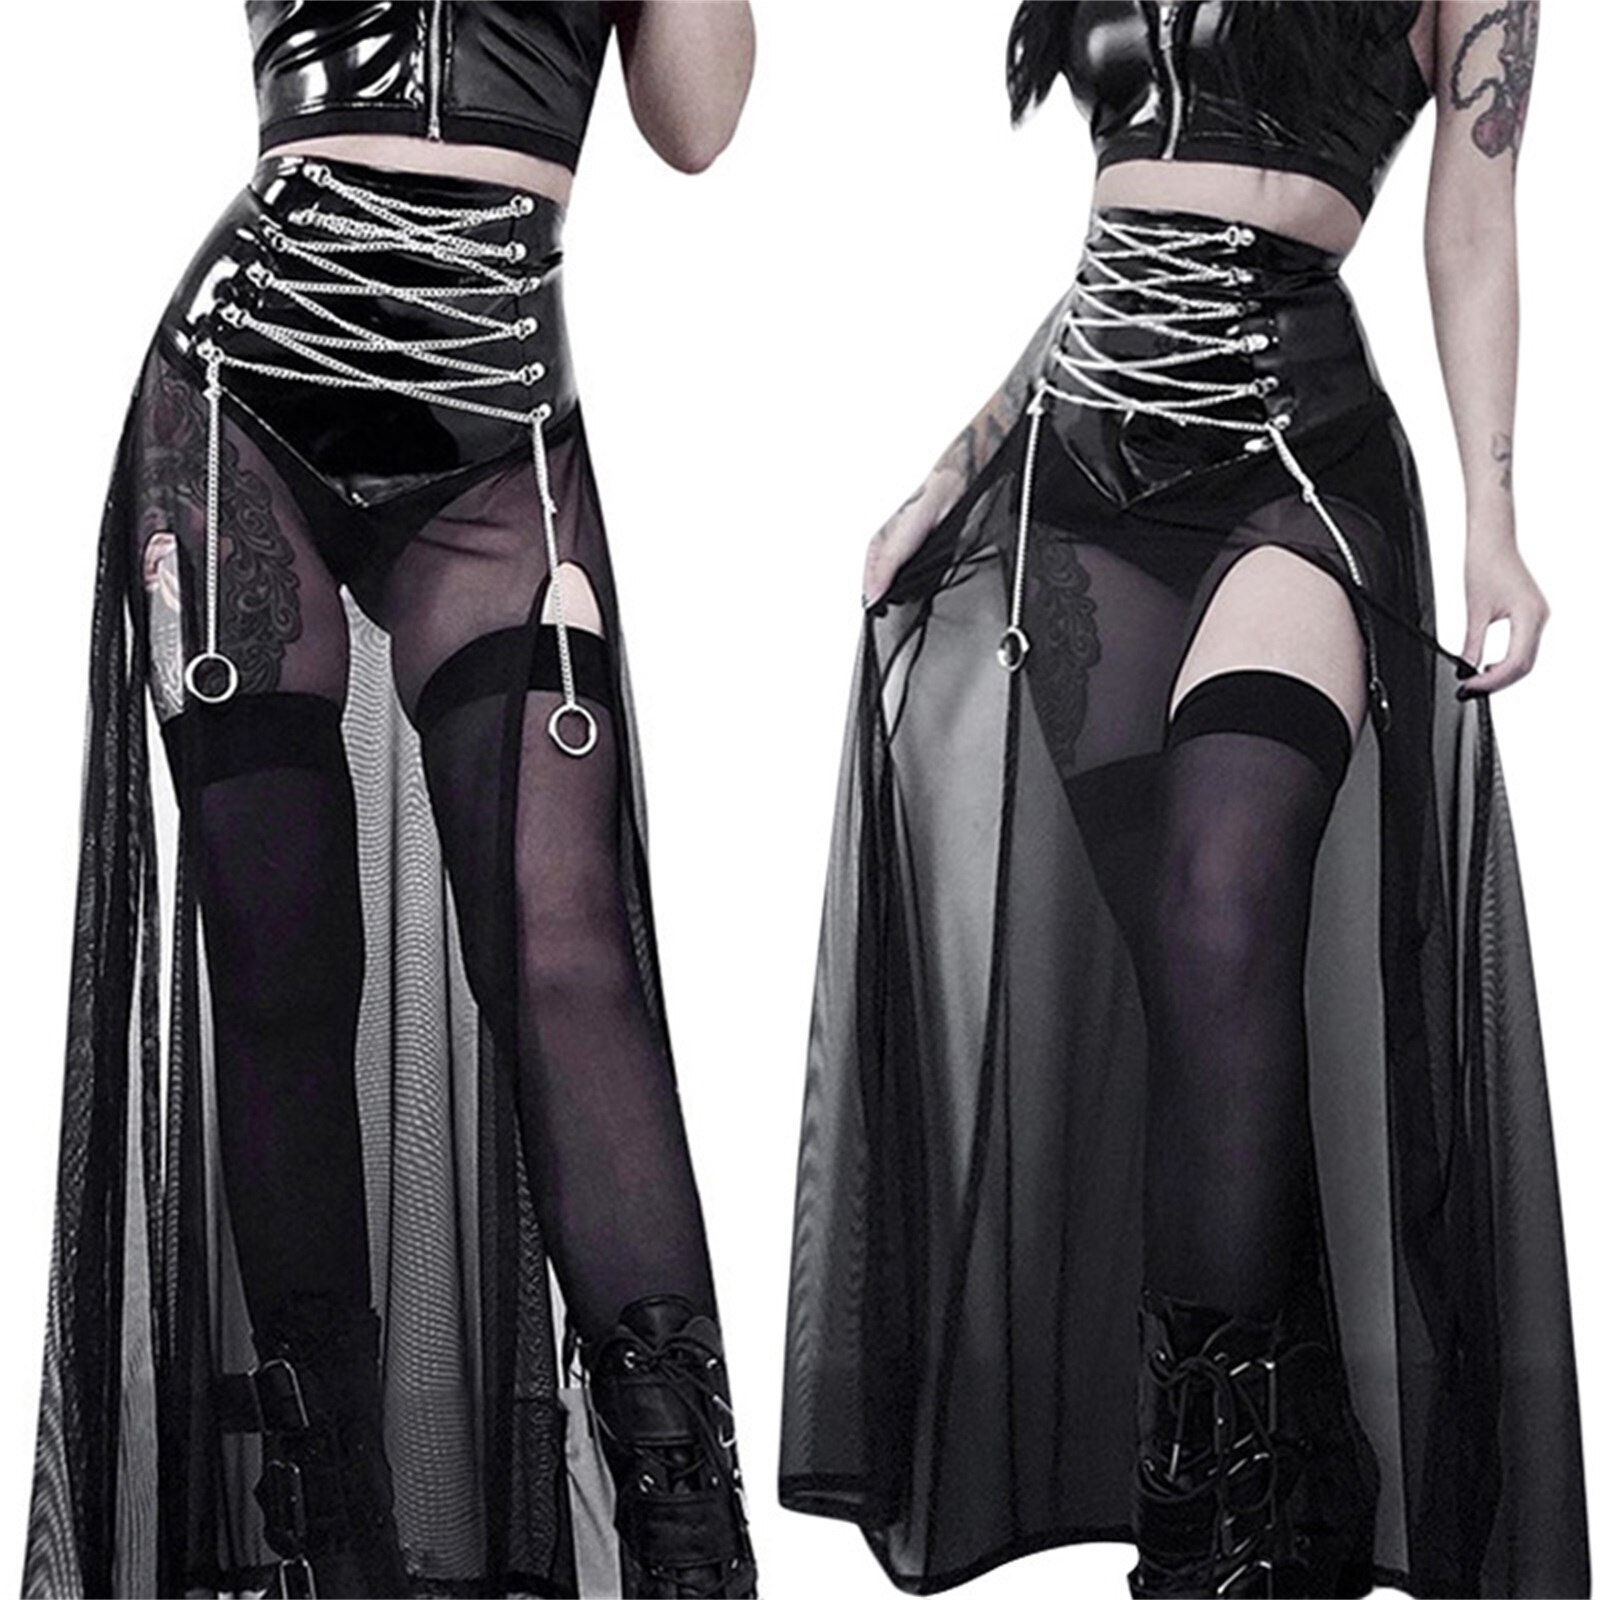 Women's Fashion Gothic Long Skirt Mesh Transparent Cross Necklace Strappy Skirt Summer Dark Style Side High